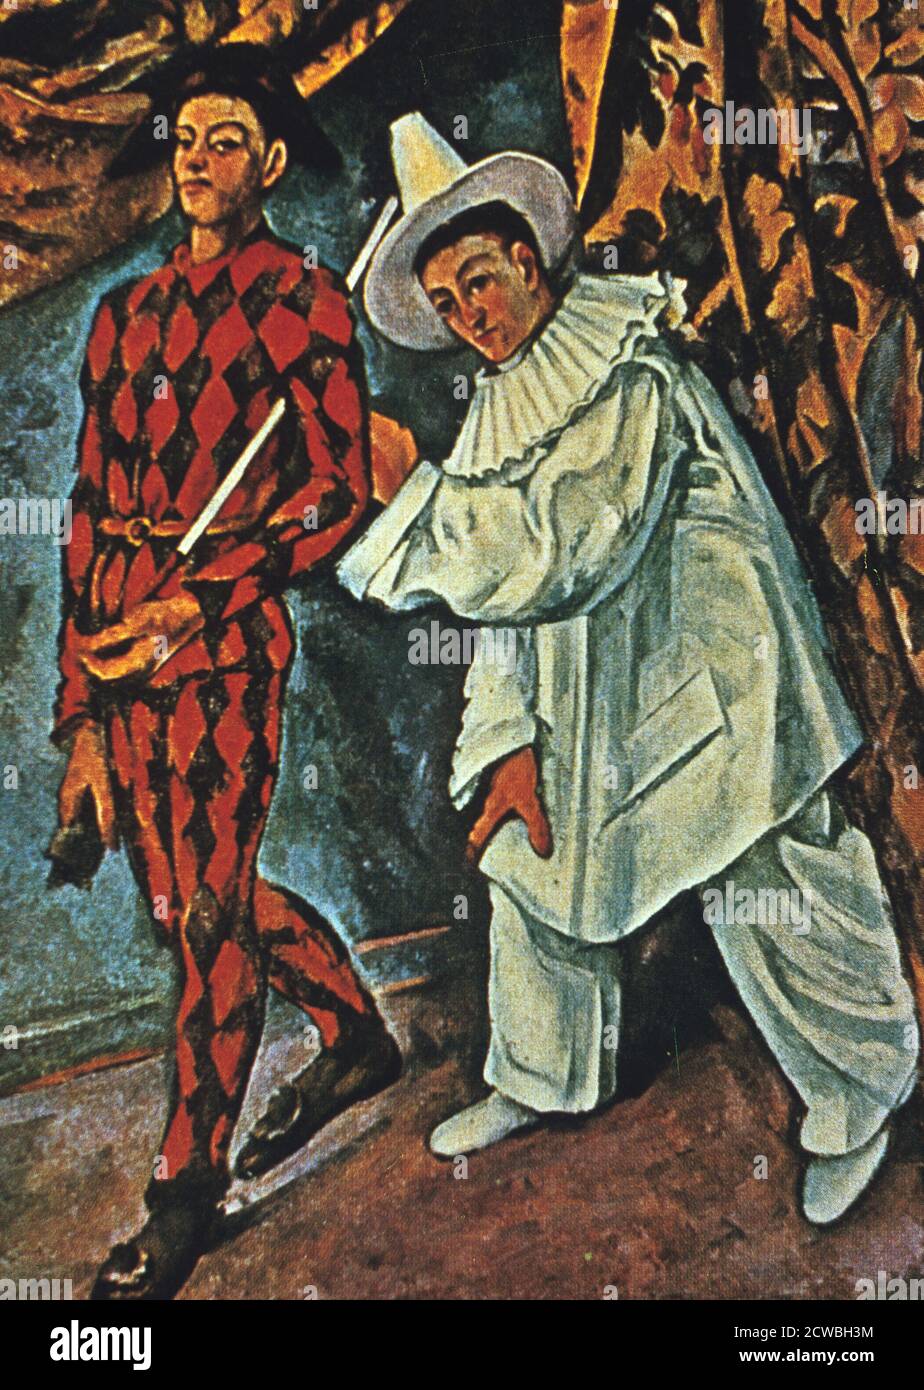 Arlequin et Pierrot' by Paul Cezanne, 1888. 'Harlequin and Pierrot'. Stock Photo